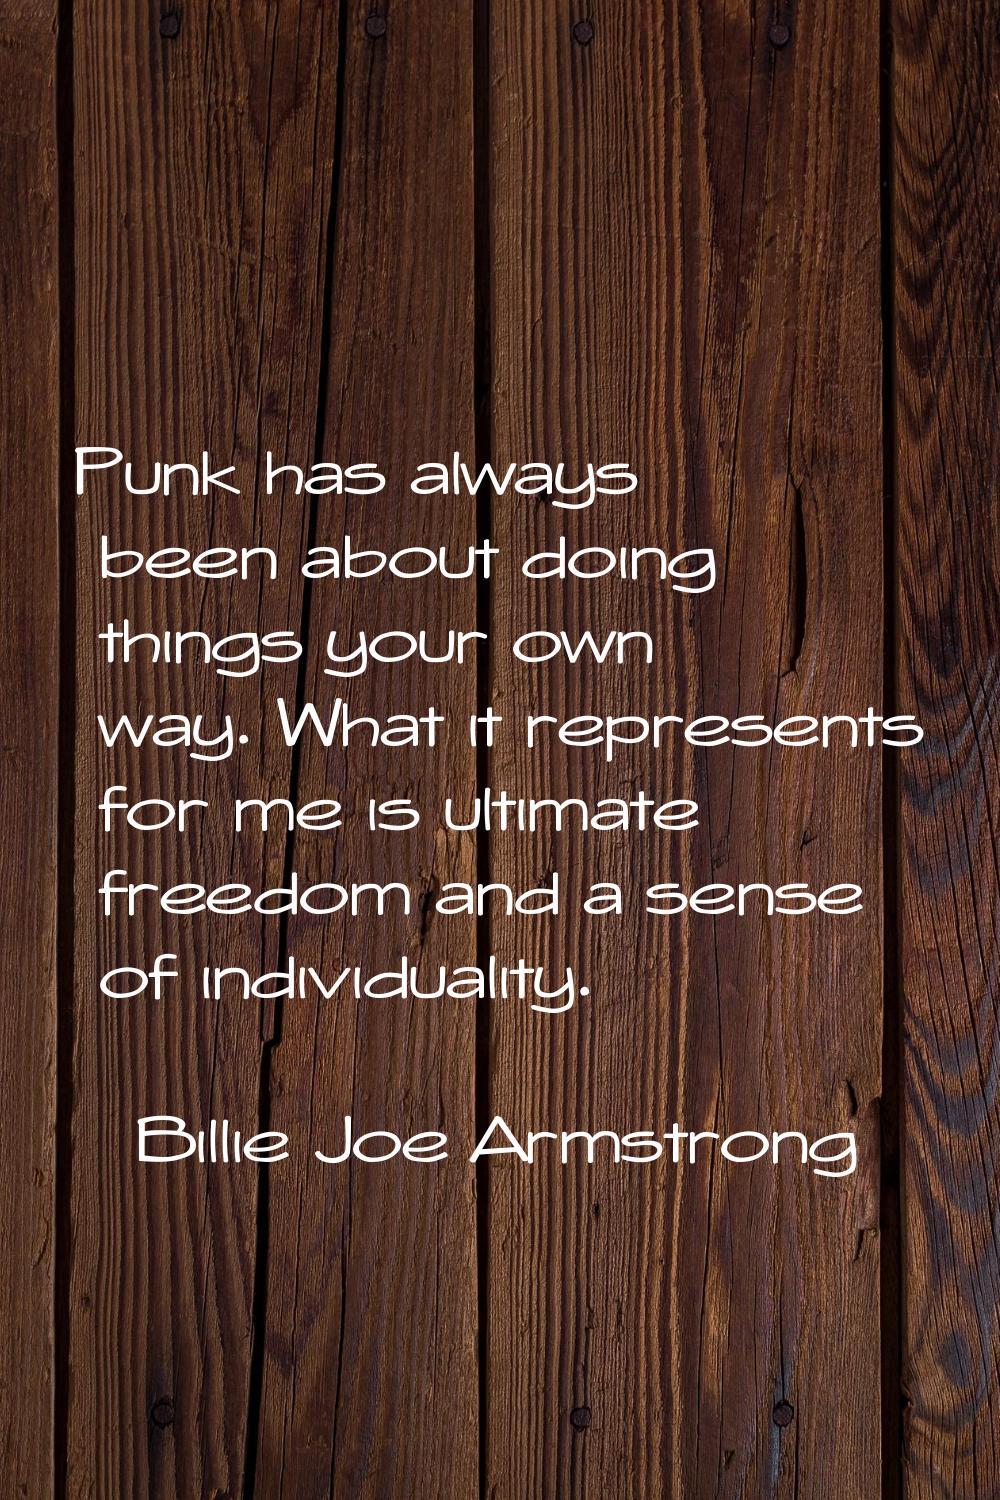 Punk has always been about doing things your own way. What it represents for me is ultimate freedom